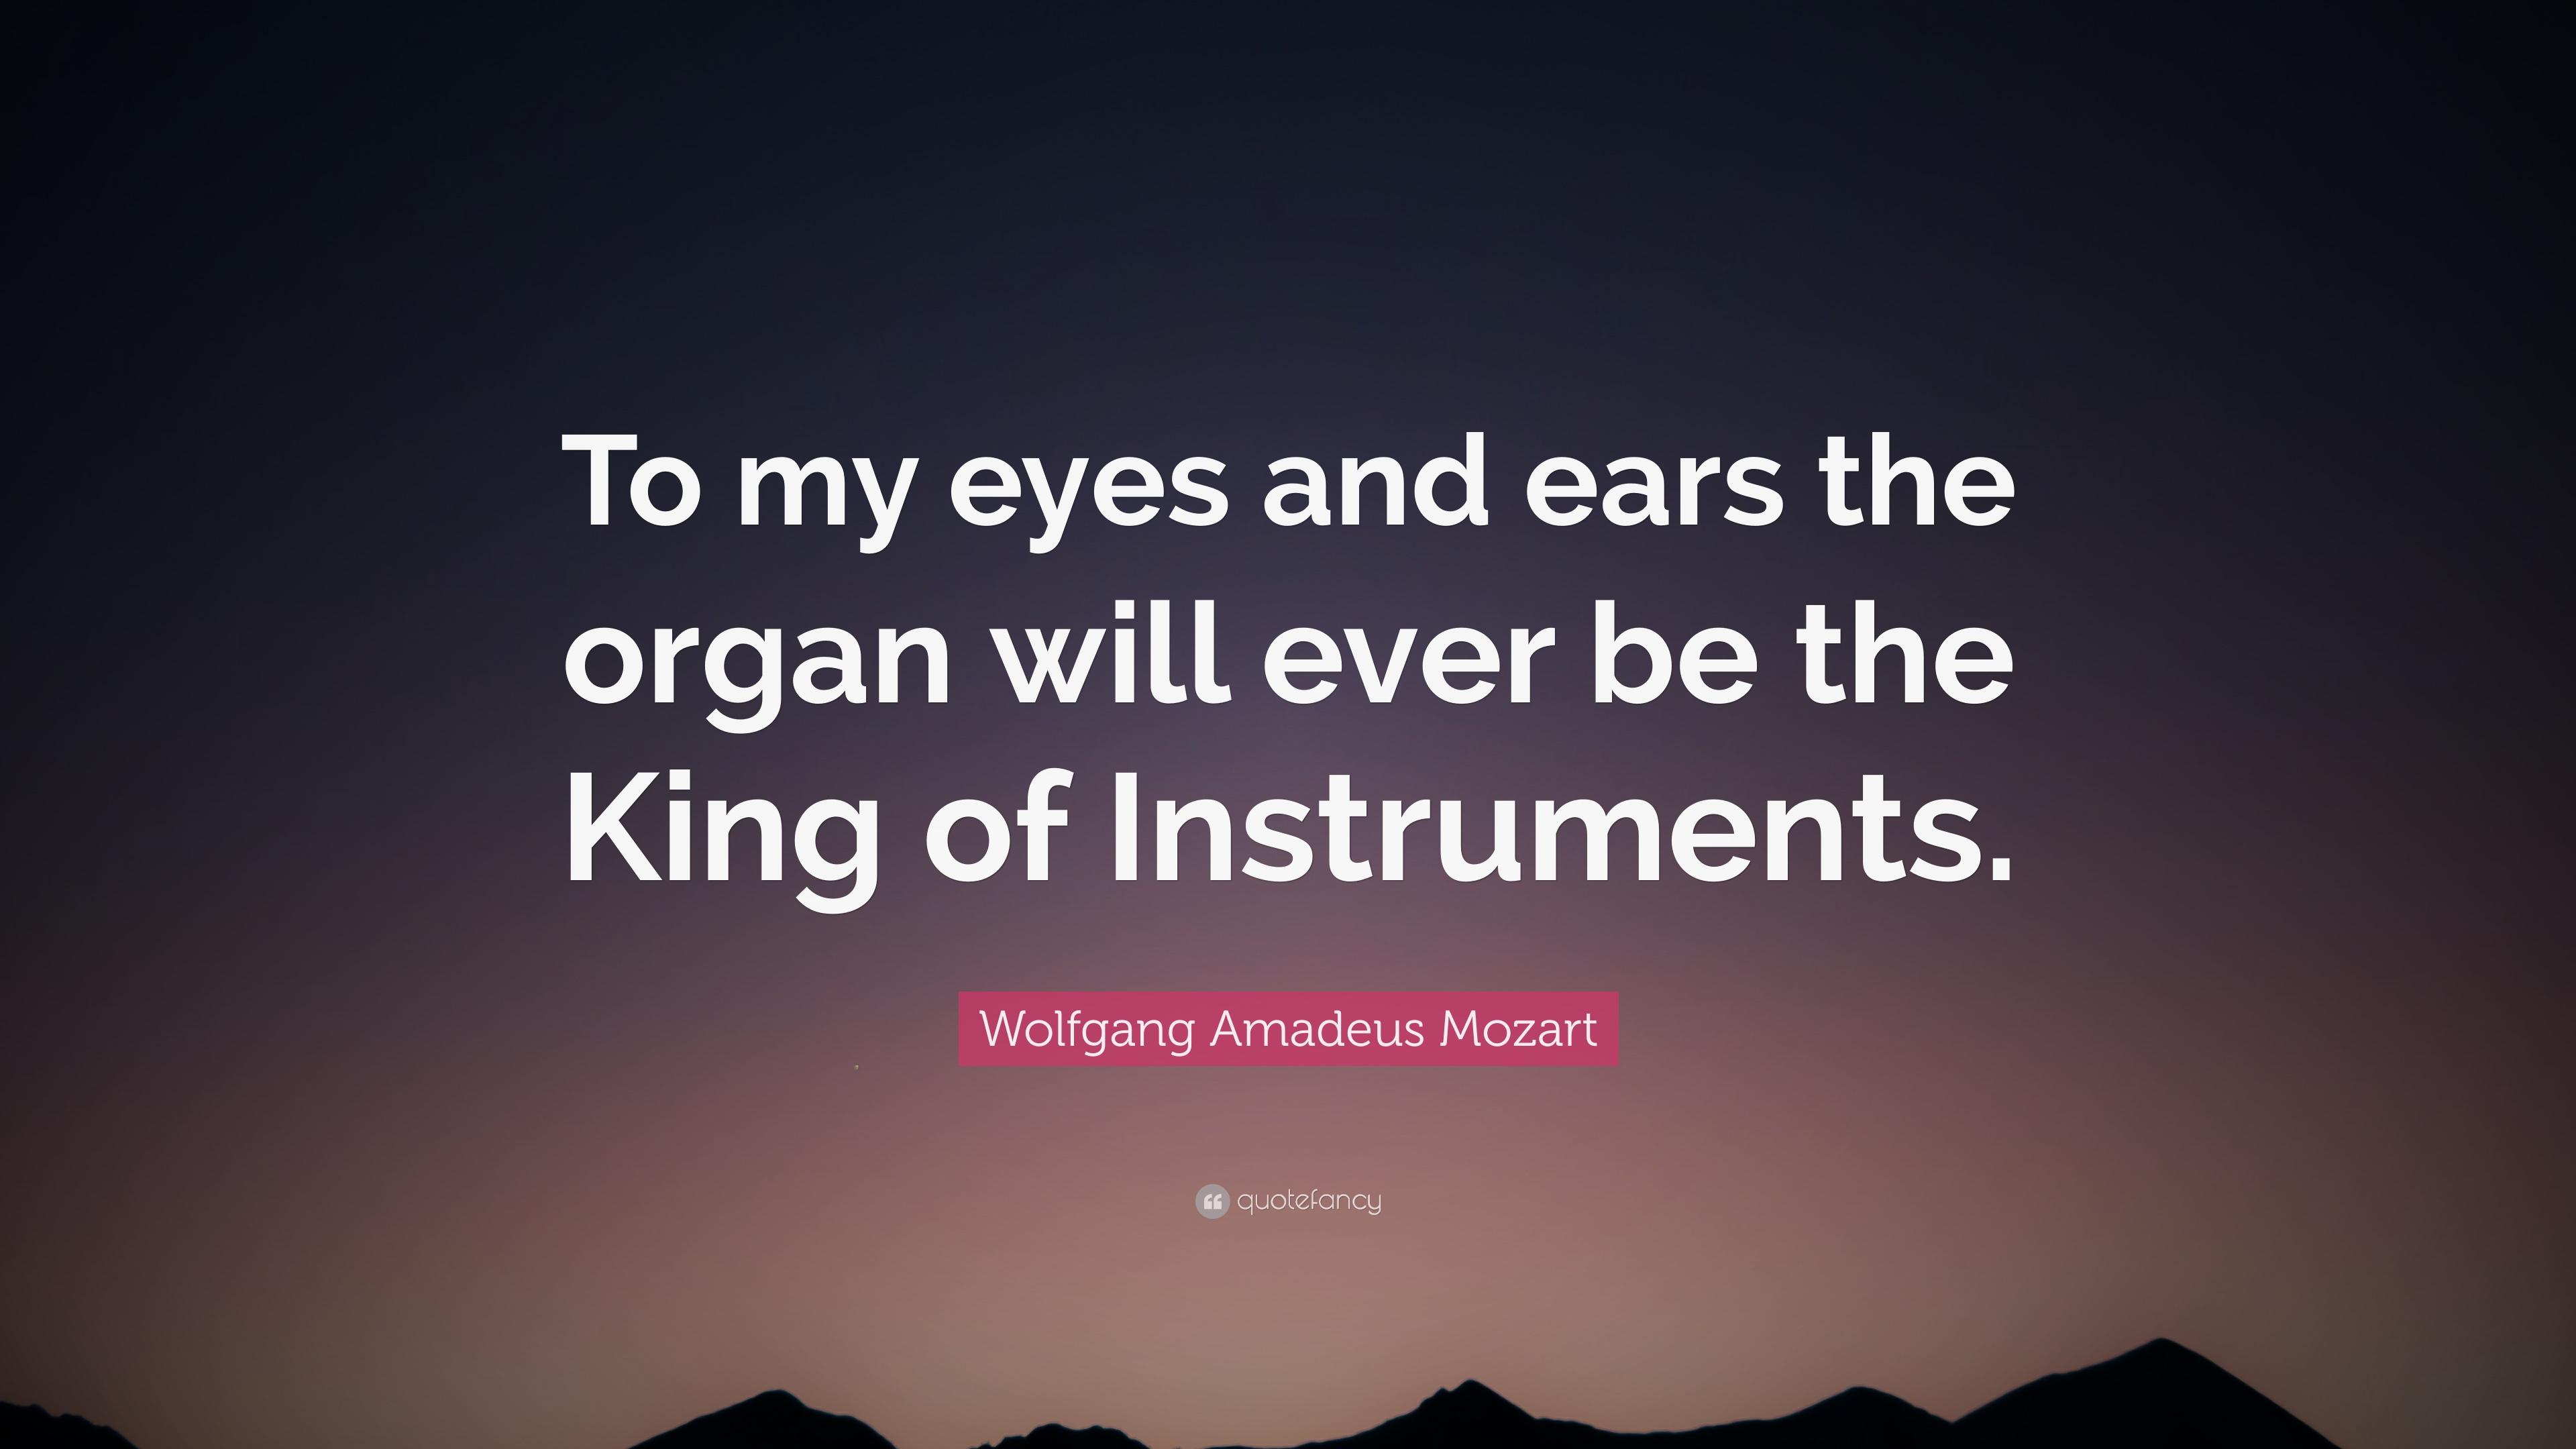 Wolfgang Amadeus Mozart Quote: “To my eyes and ears